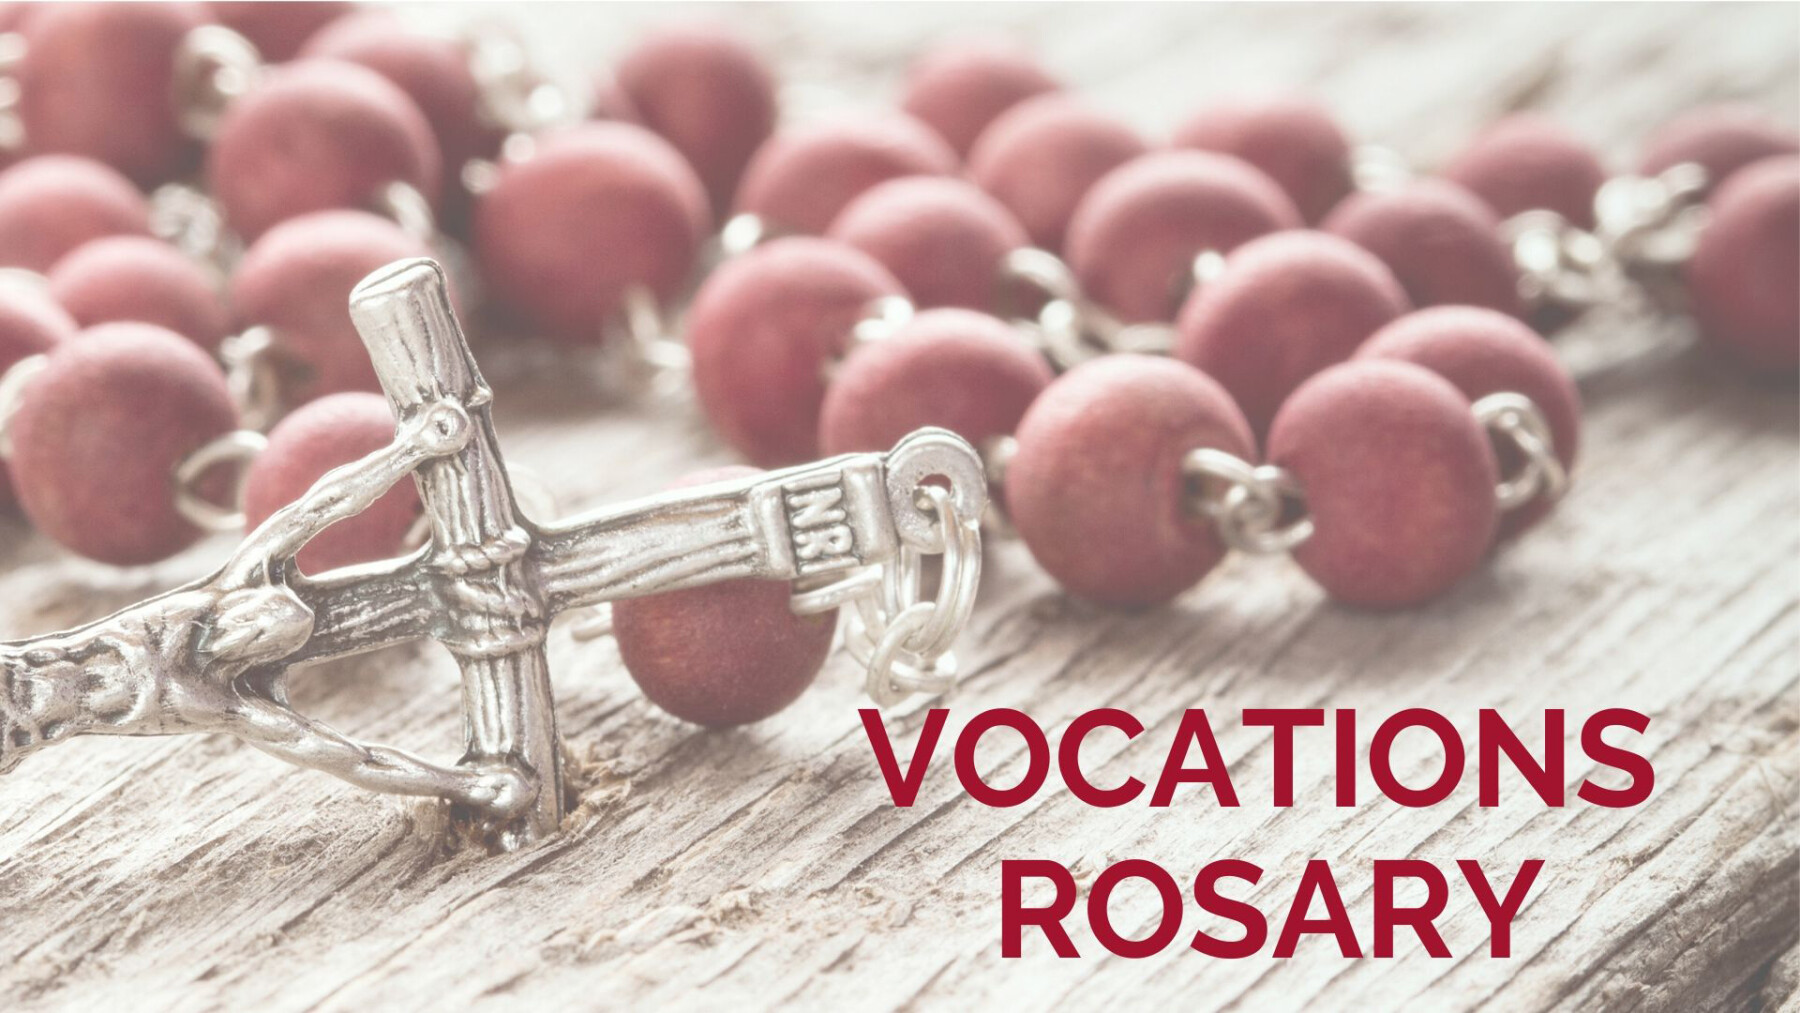 Vocations Rosary